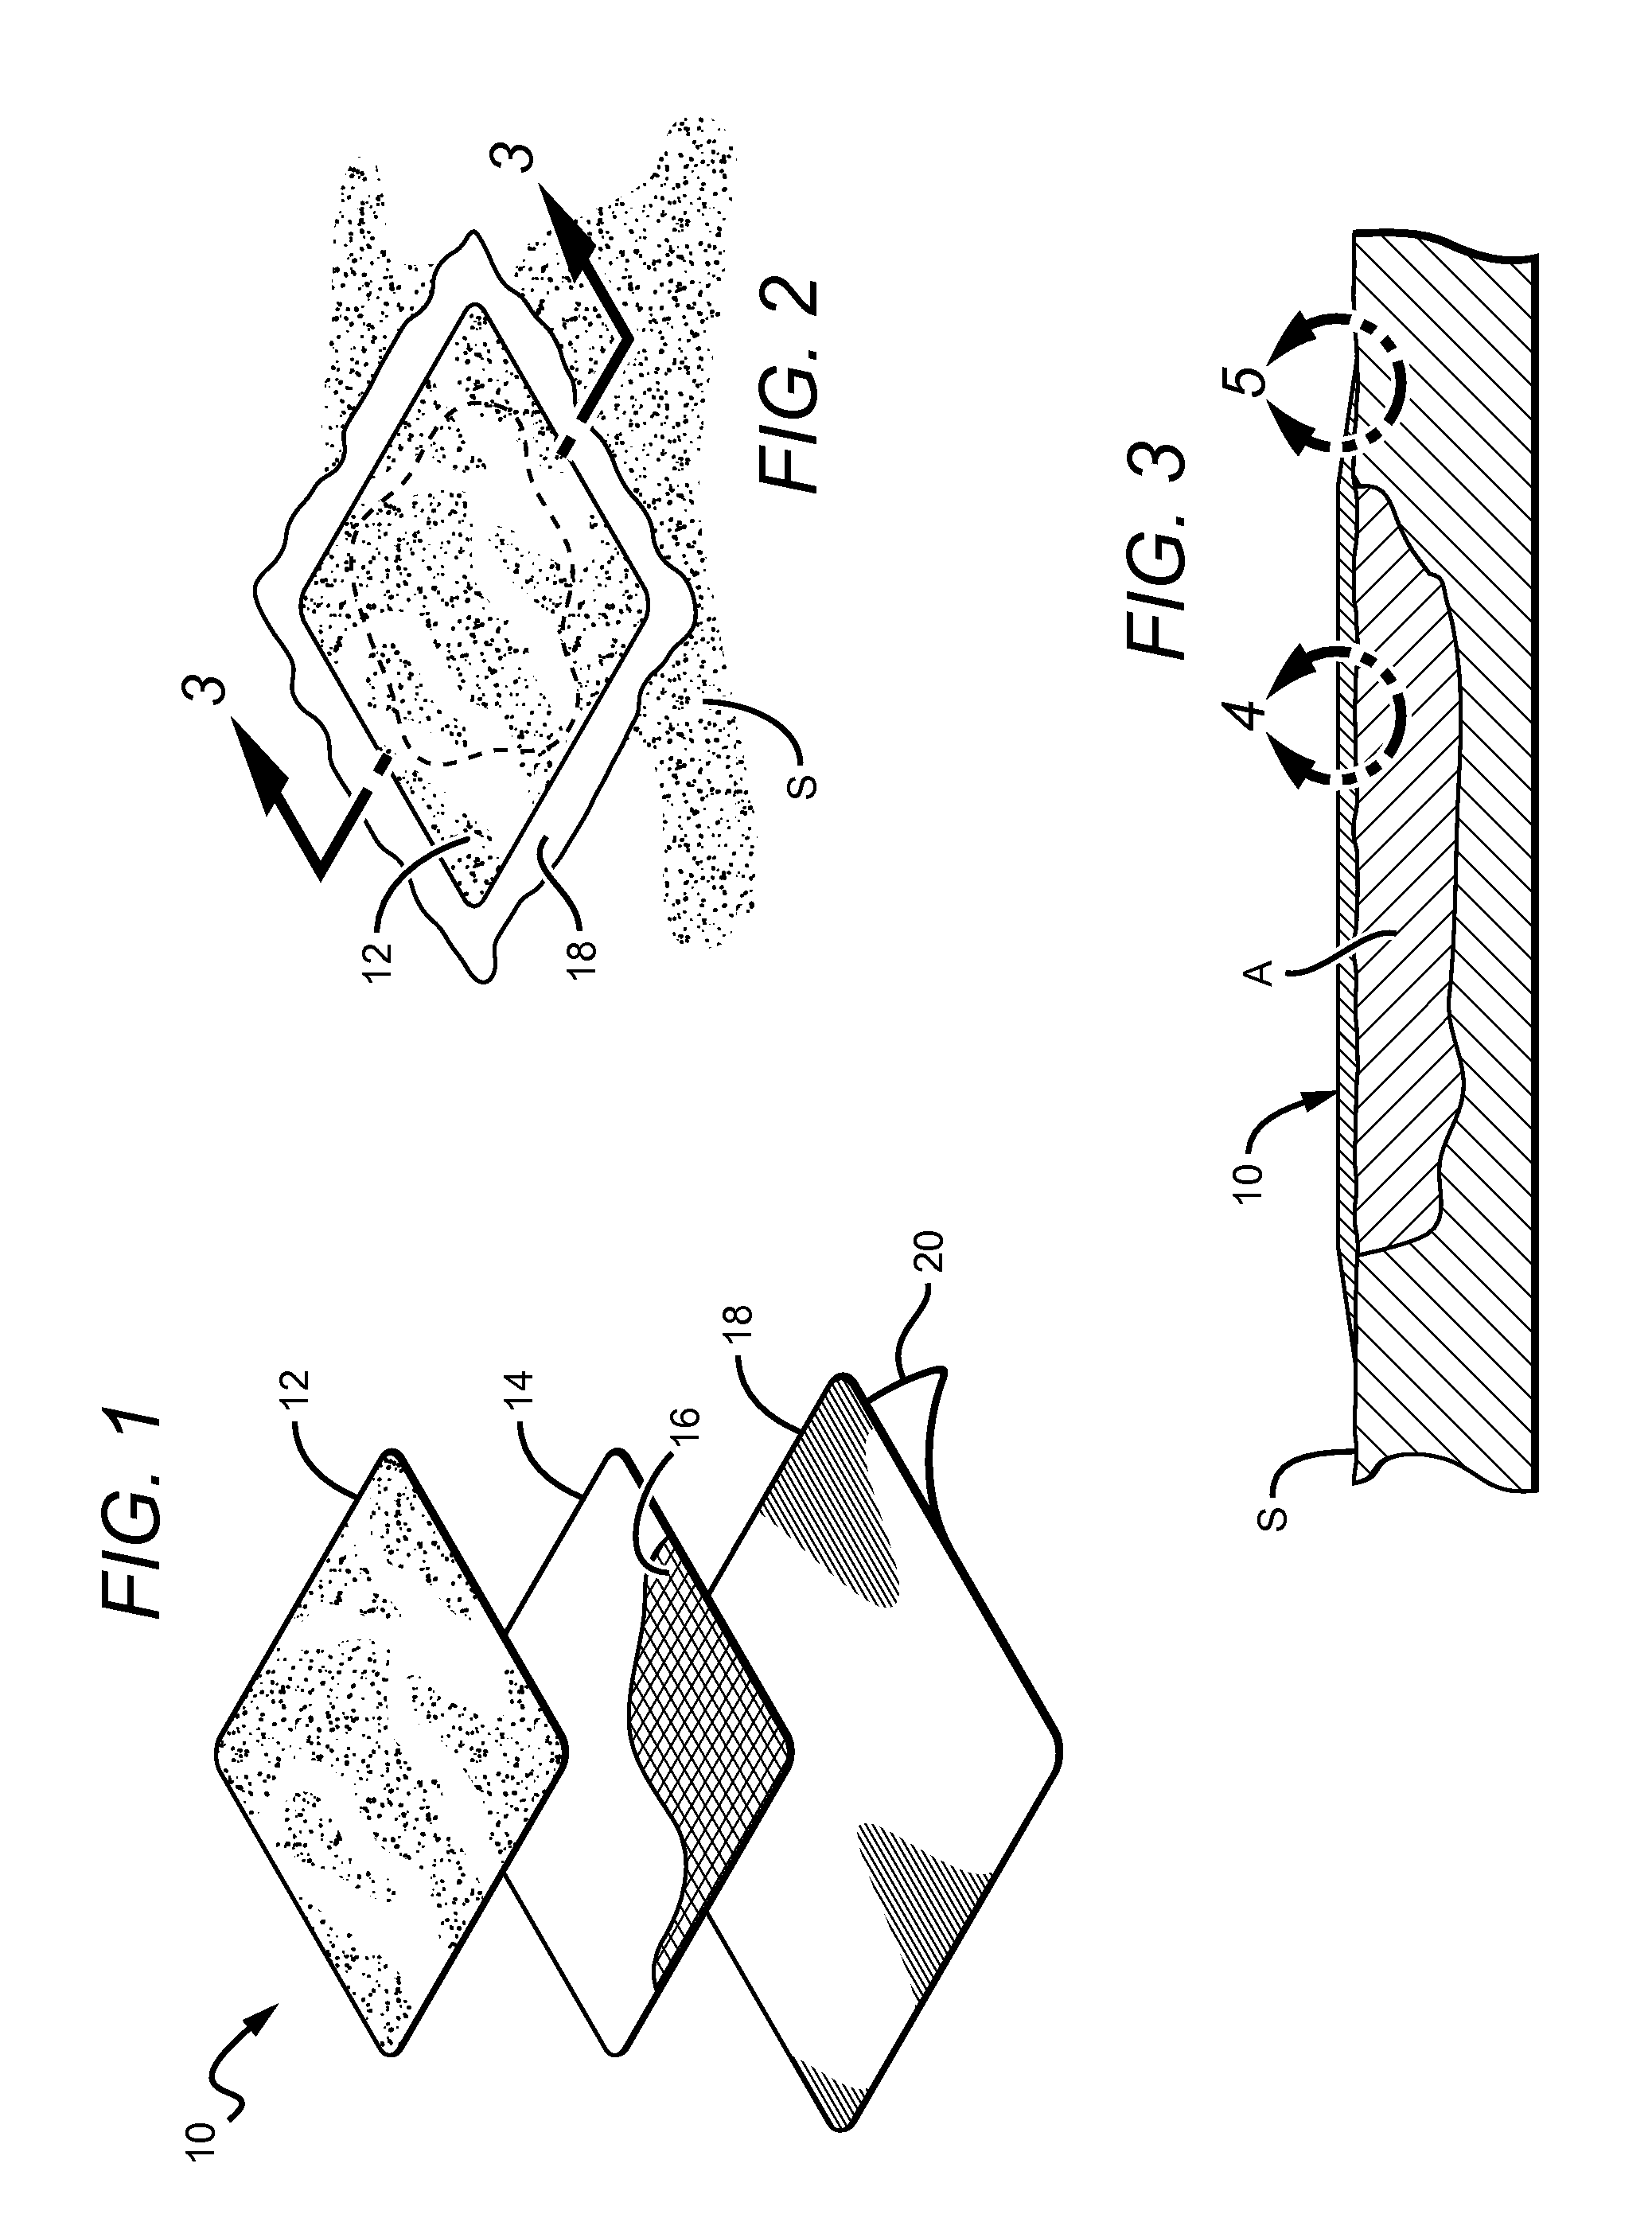 Pot hole repair patch and method of installation